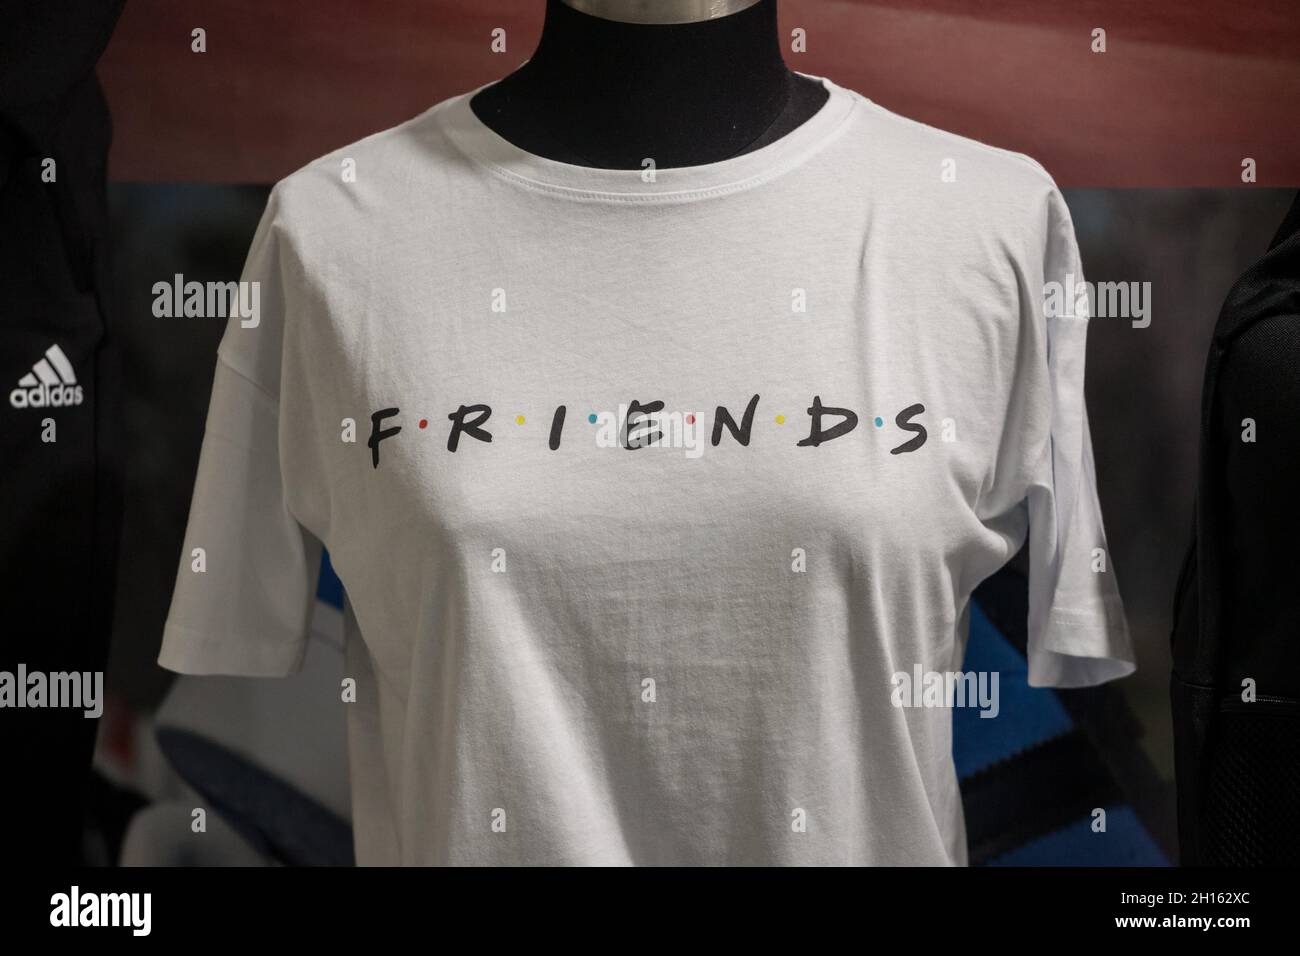 BELGRADE, SERBIA - JUNE 1, 2021: Selective blur on a T-Shirt with the logo of Friends Sitcom series for sale in Belgrade. Friends is an iconic TV show Stock Photo